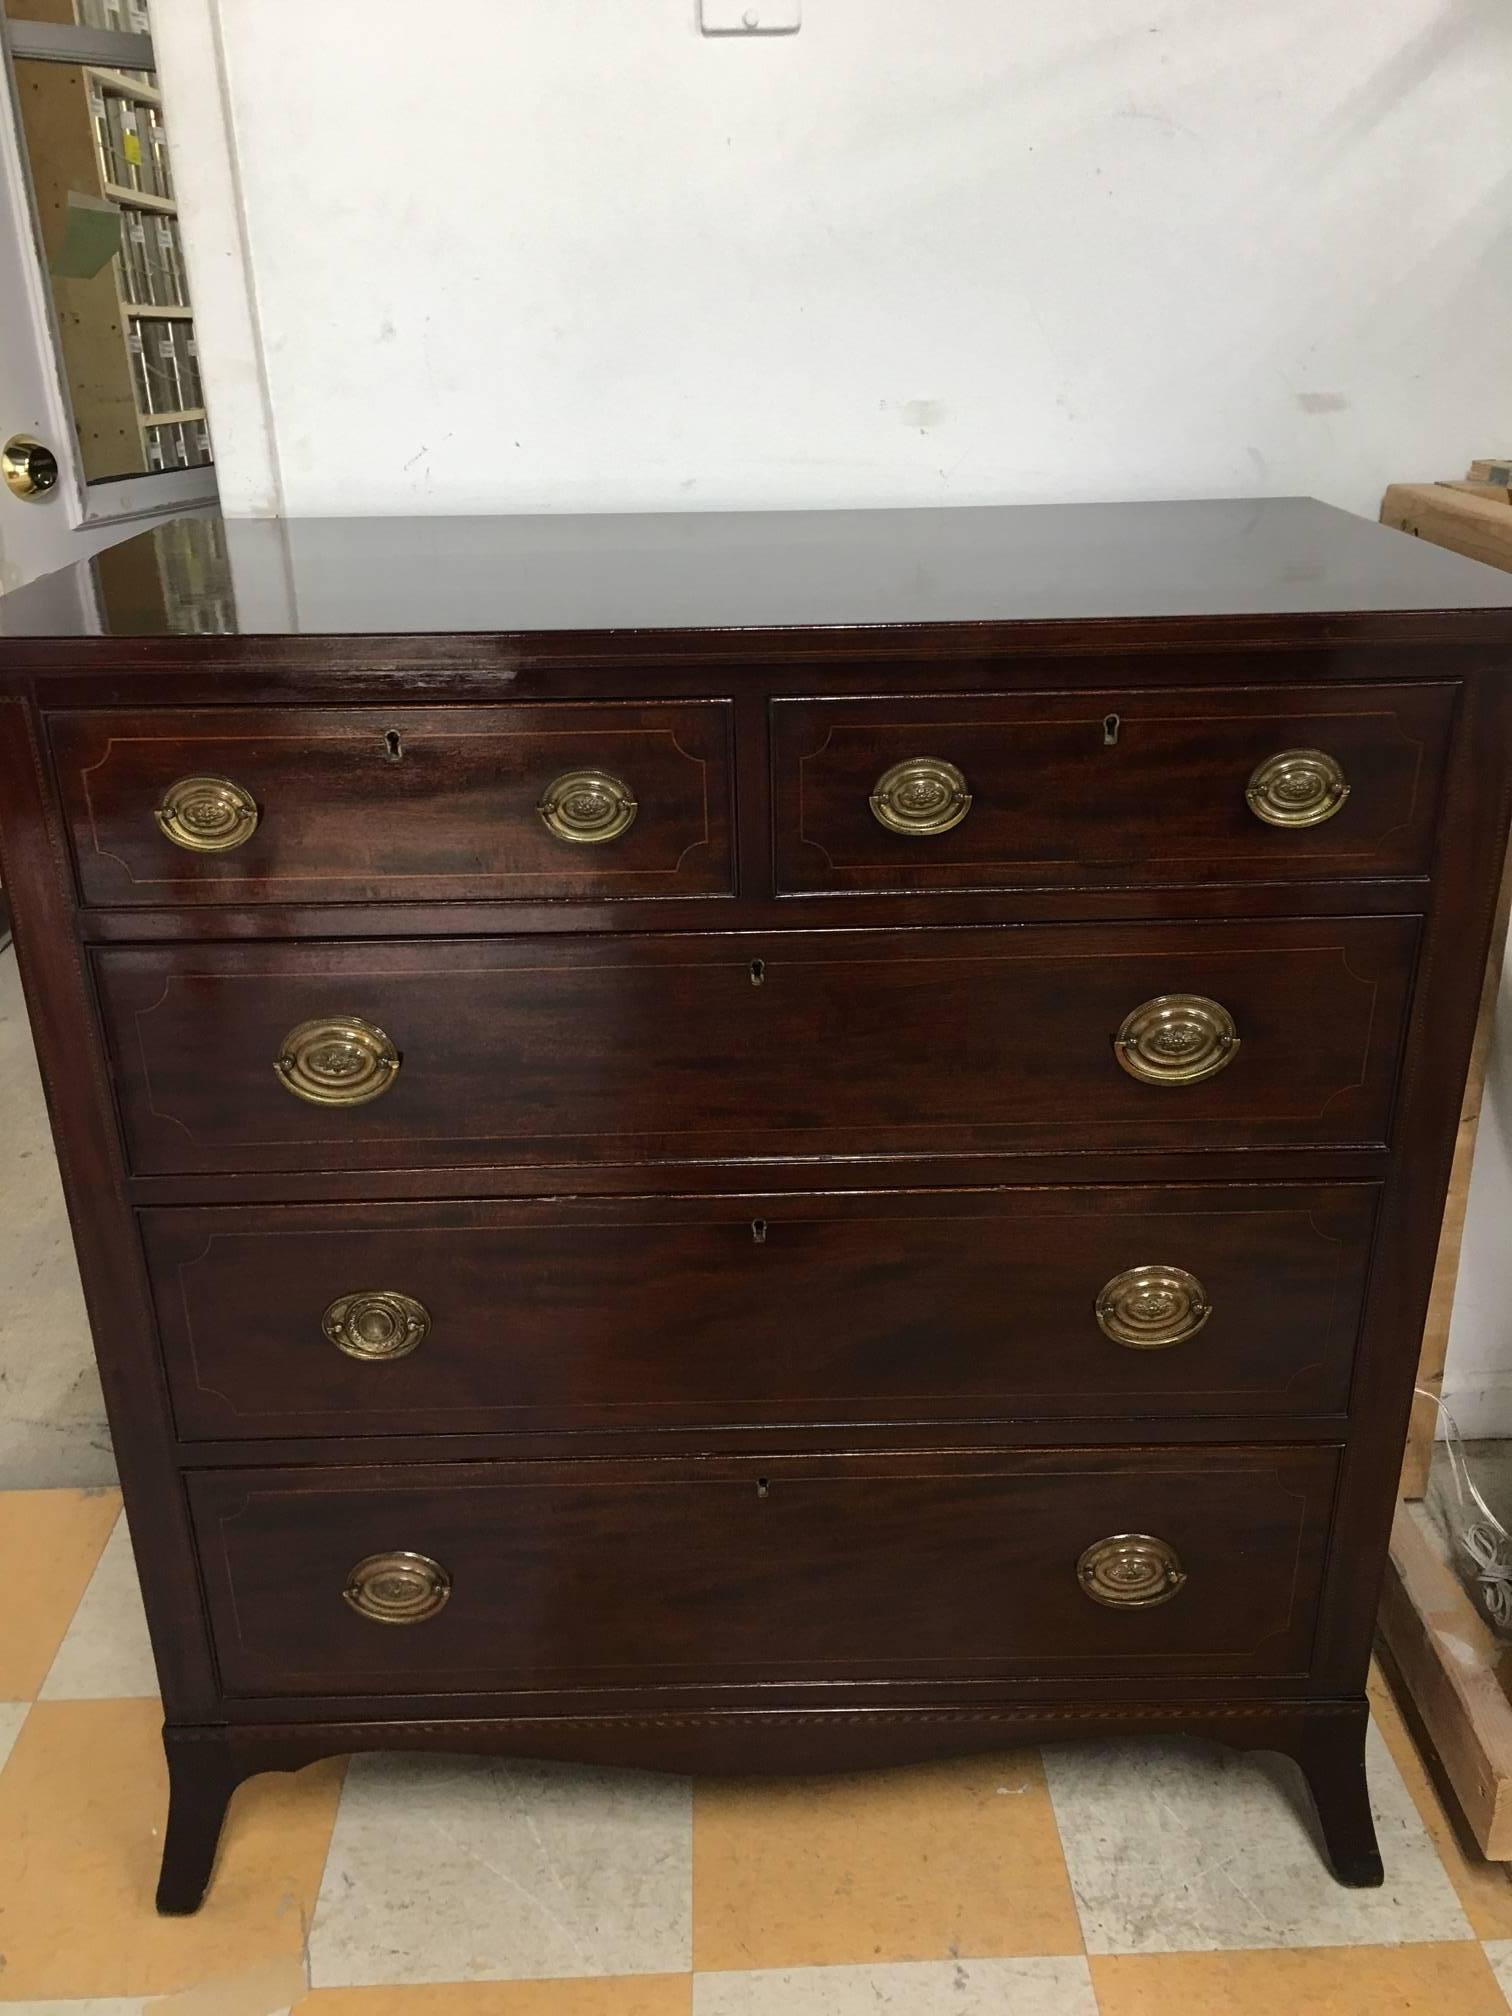 English 19th century Regency style chest of drawers. Two over three drawers. Mahogany. Clean and ready to go. Note minor flaw as pictured. This piece has a deep rich polish and is lovely, in excellent condition for its age. 